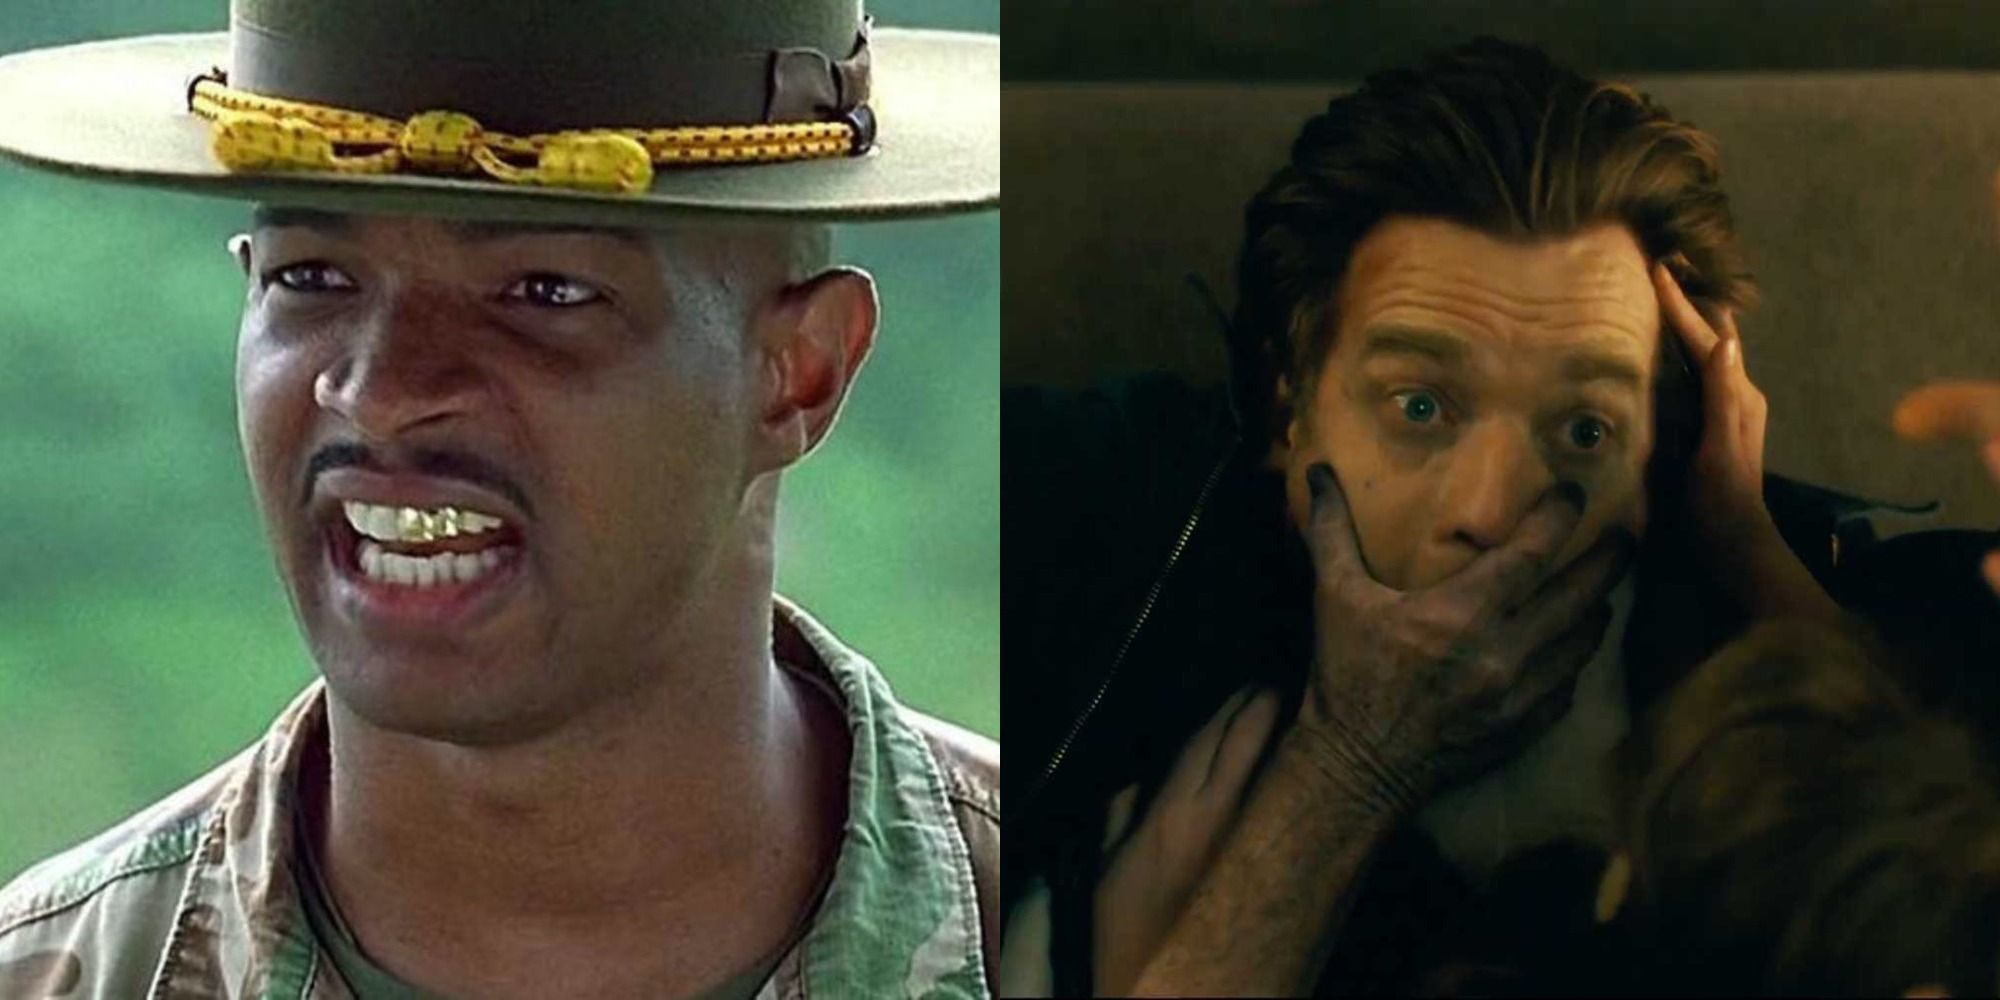 Two side by side images from Major Payne and Doctor Sleep